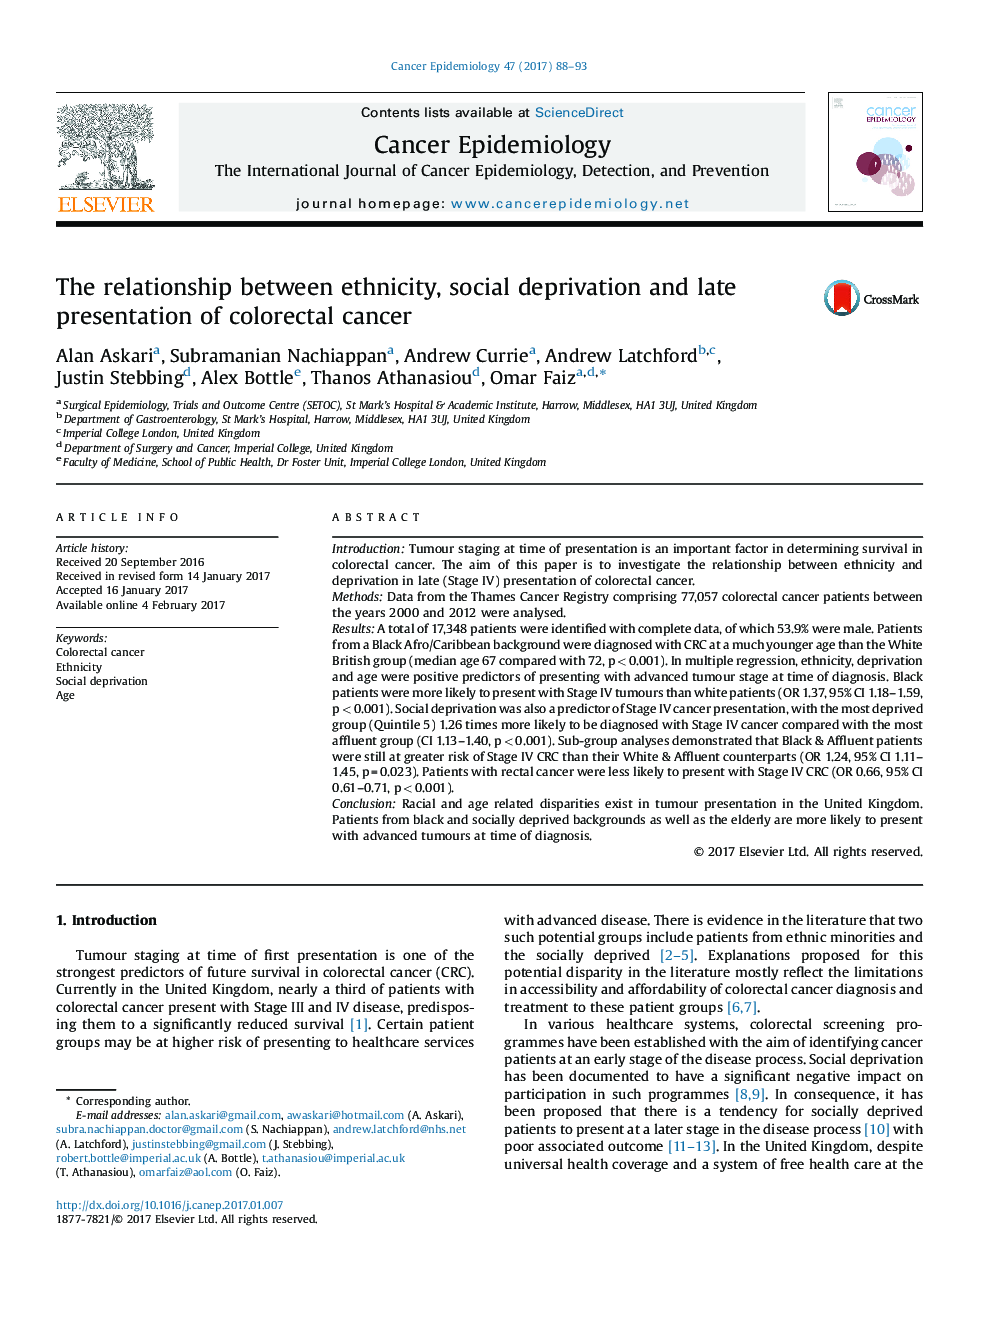 The relationship between ethnicity, social deprivation and late presentation of colorectal cancer